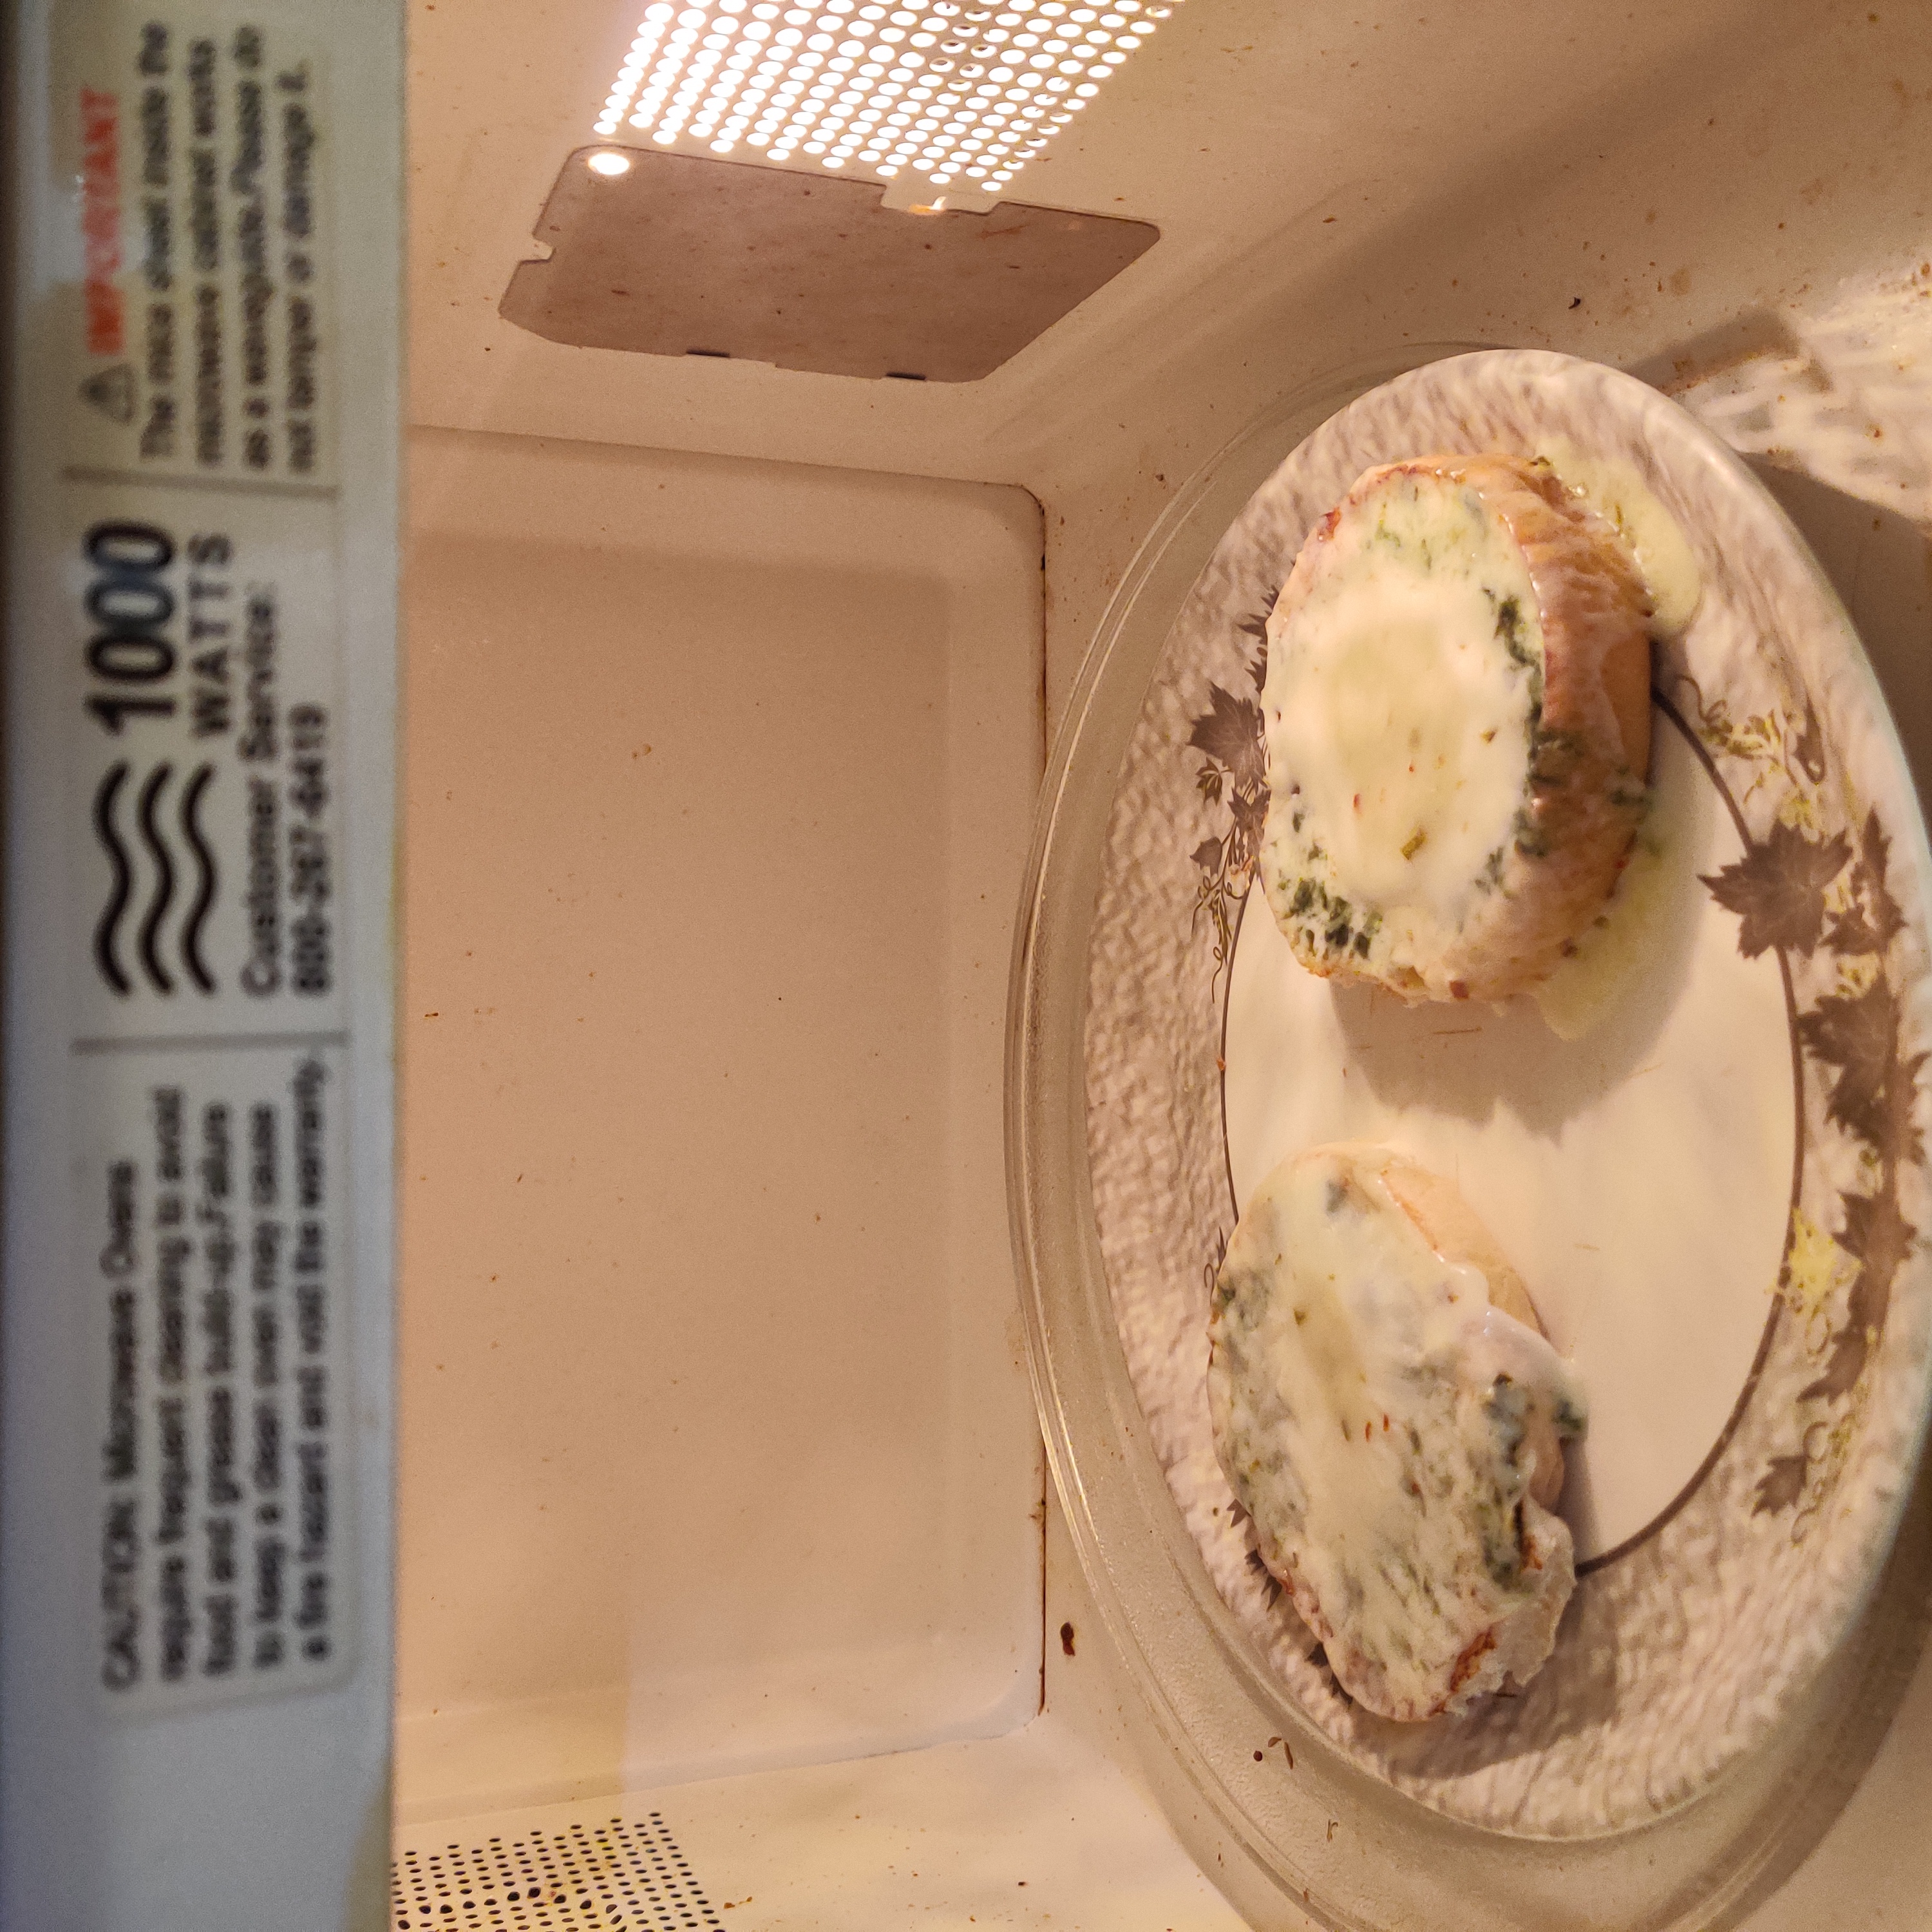 Image of bottom buns in microwave